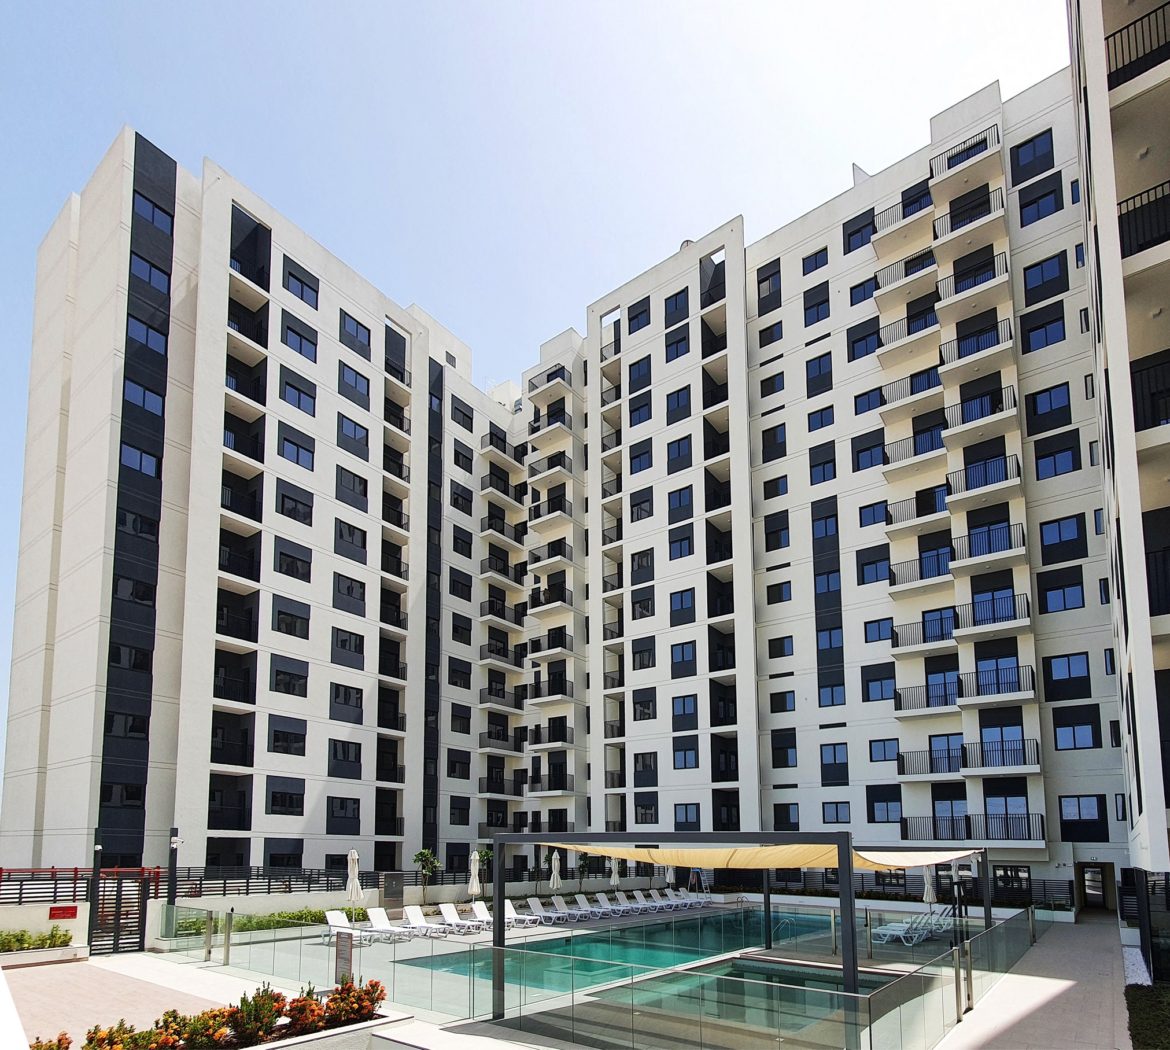 wasl properties launches The Nook 1 at wasl gate onto the freehold market